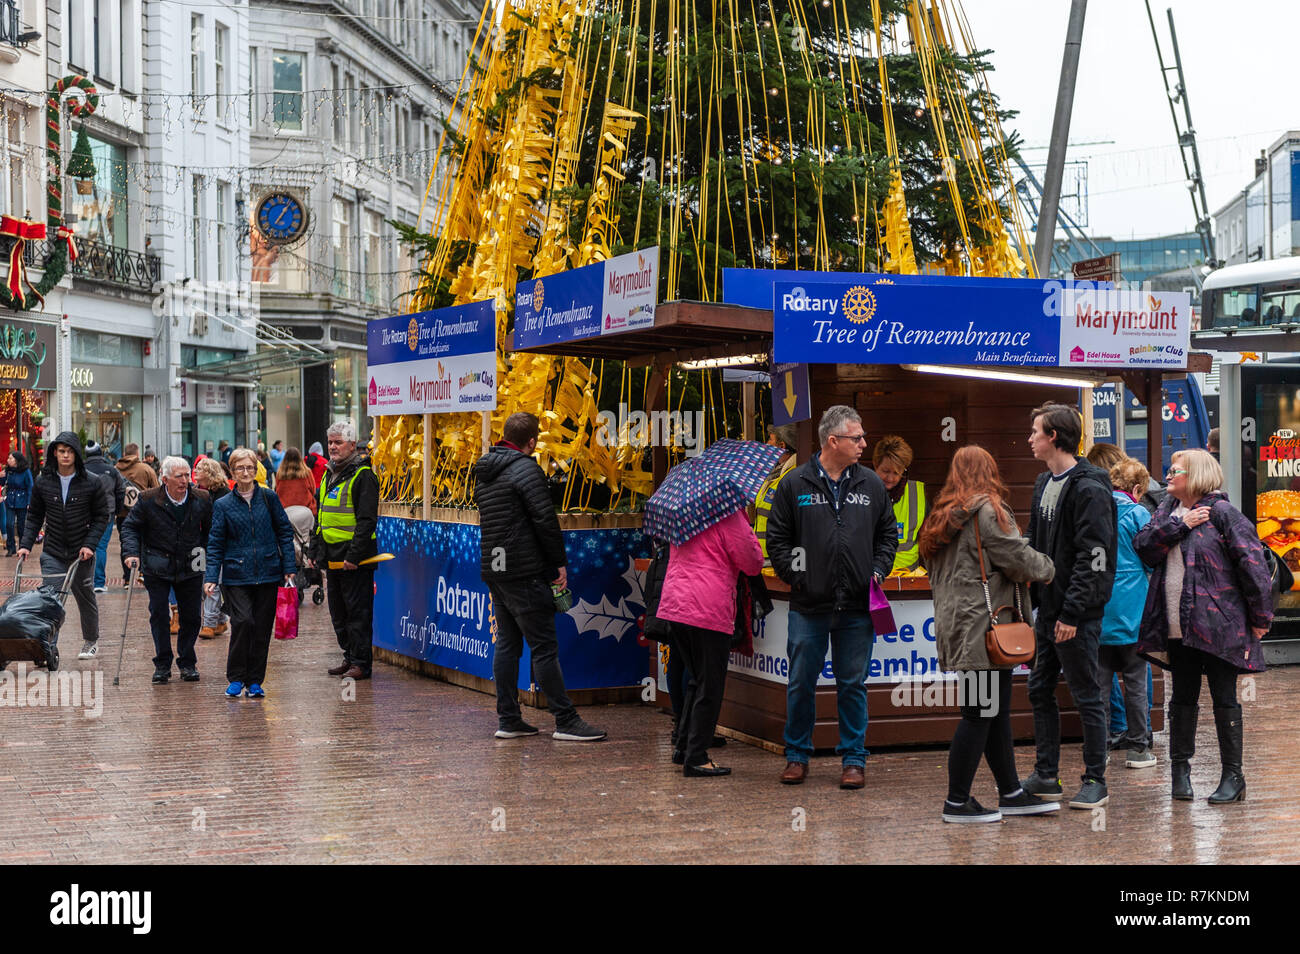 Cork, Ireland. 10th Dec, 2018. People leave messages for their loved ones on the Tree of Remembrance whilst shoppers rush around Cork city centre doing their Christmas shopping with just 15 days left until the big day. Credit: Andy Gibson/Alamy Live News. Stock Photo